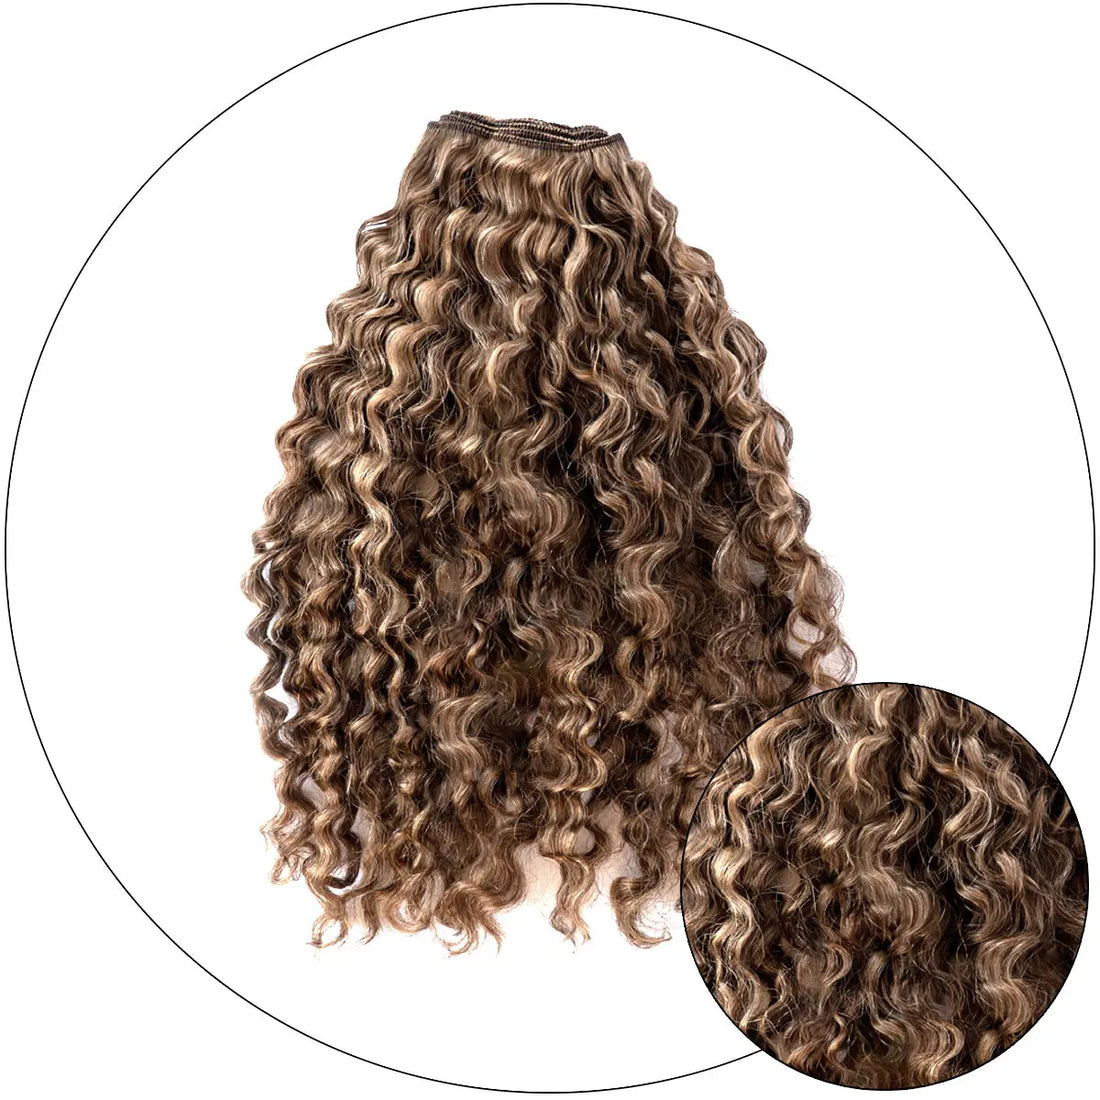 Blonde-Brown Sasha Curl - Natural Hair Extensions True and Pure Texture